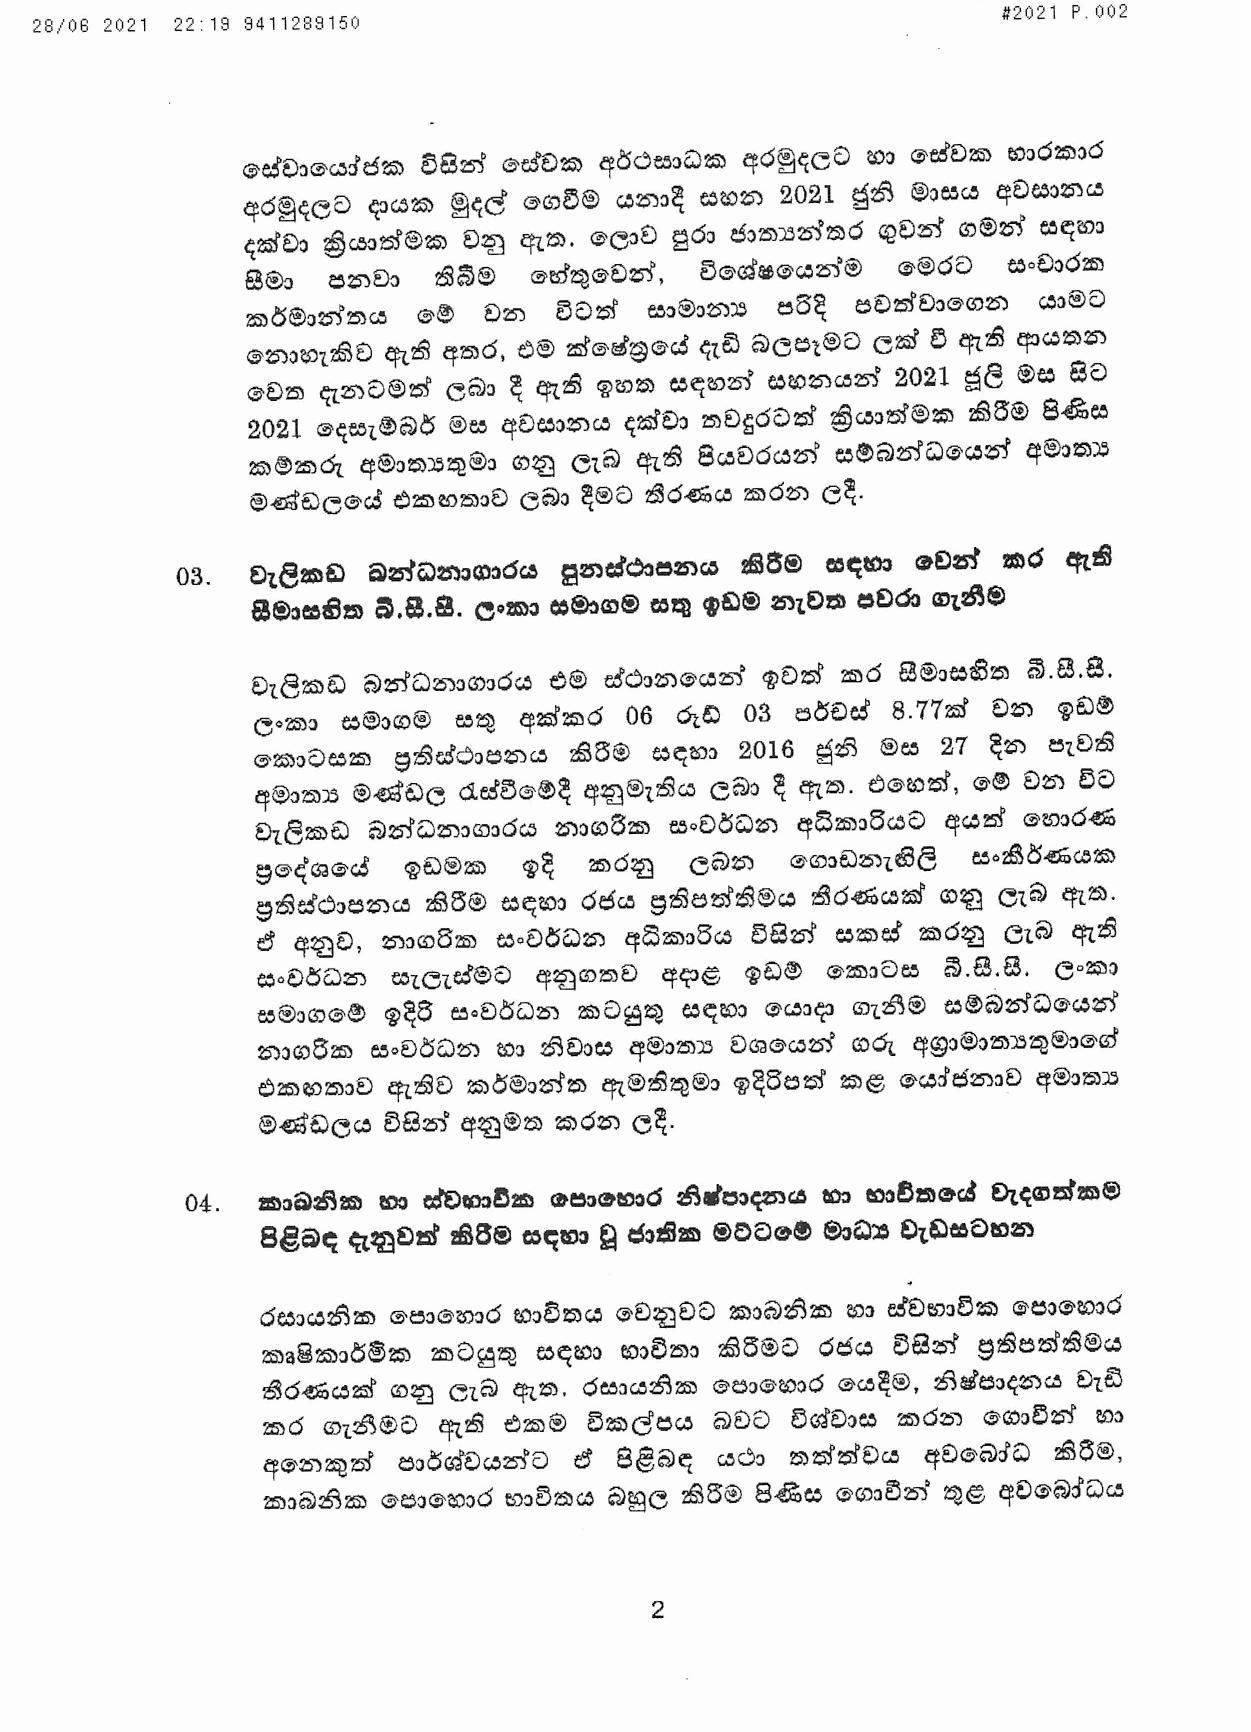 Cabinet Decision on 28.06.2021 page 002